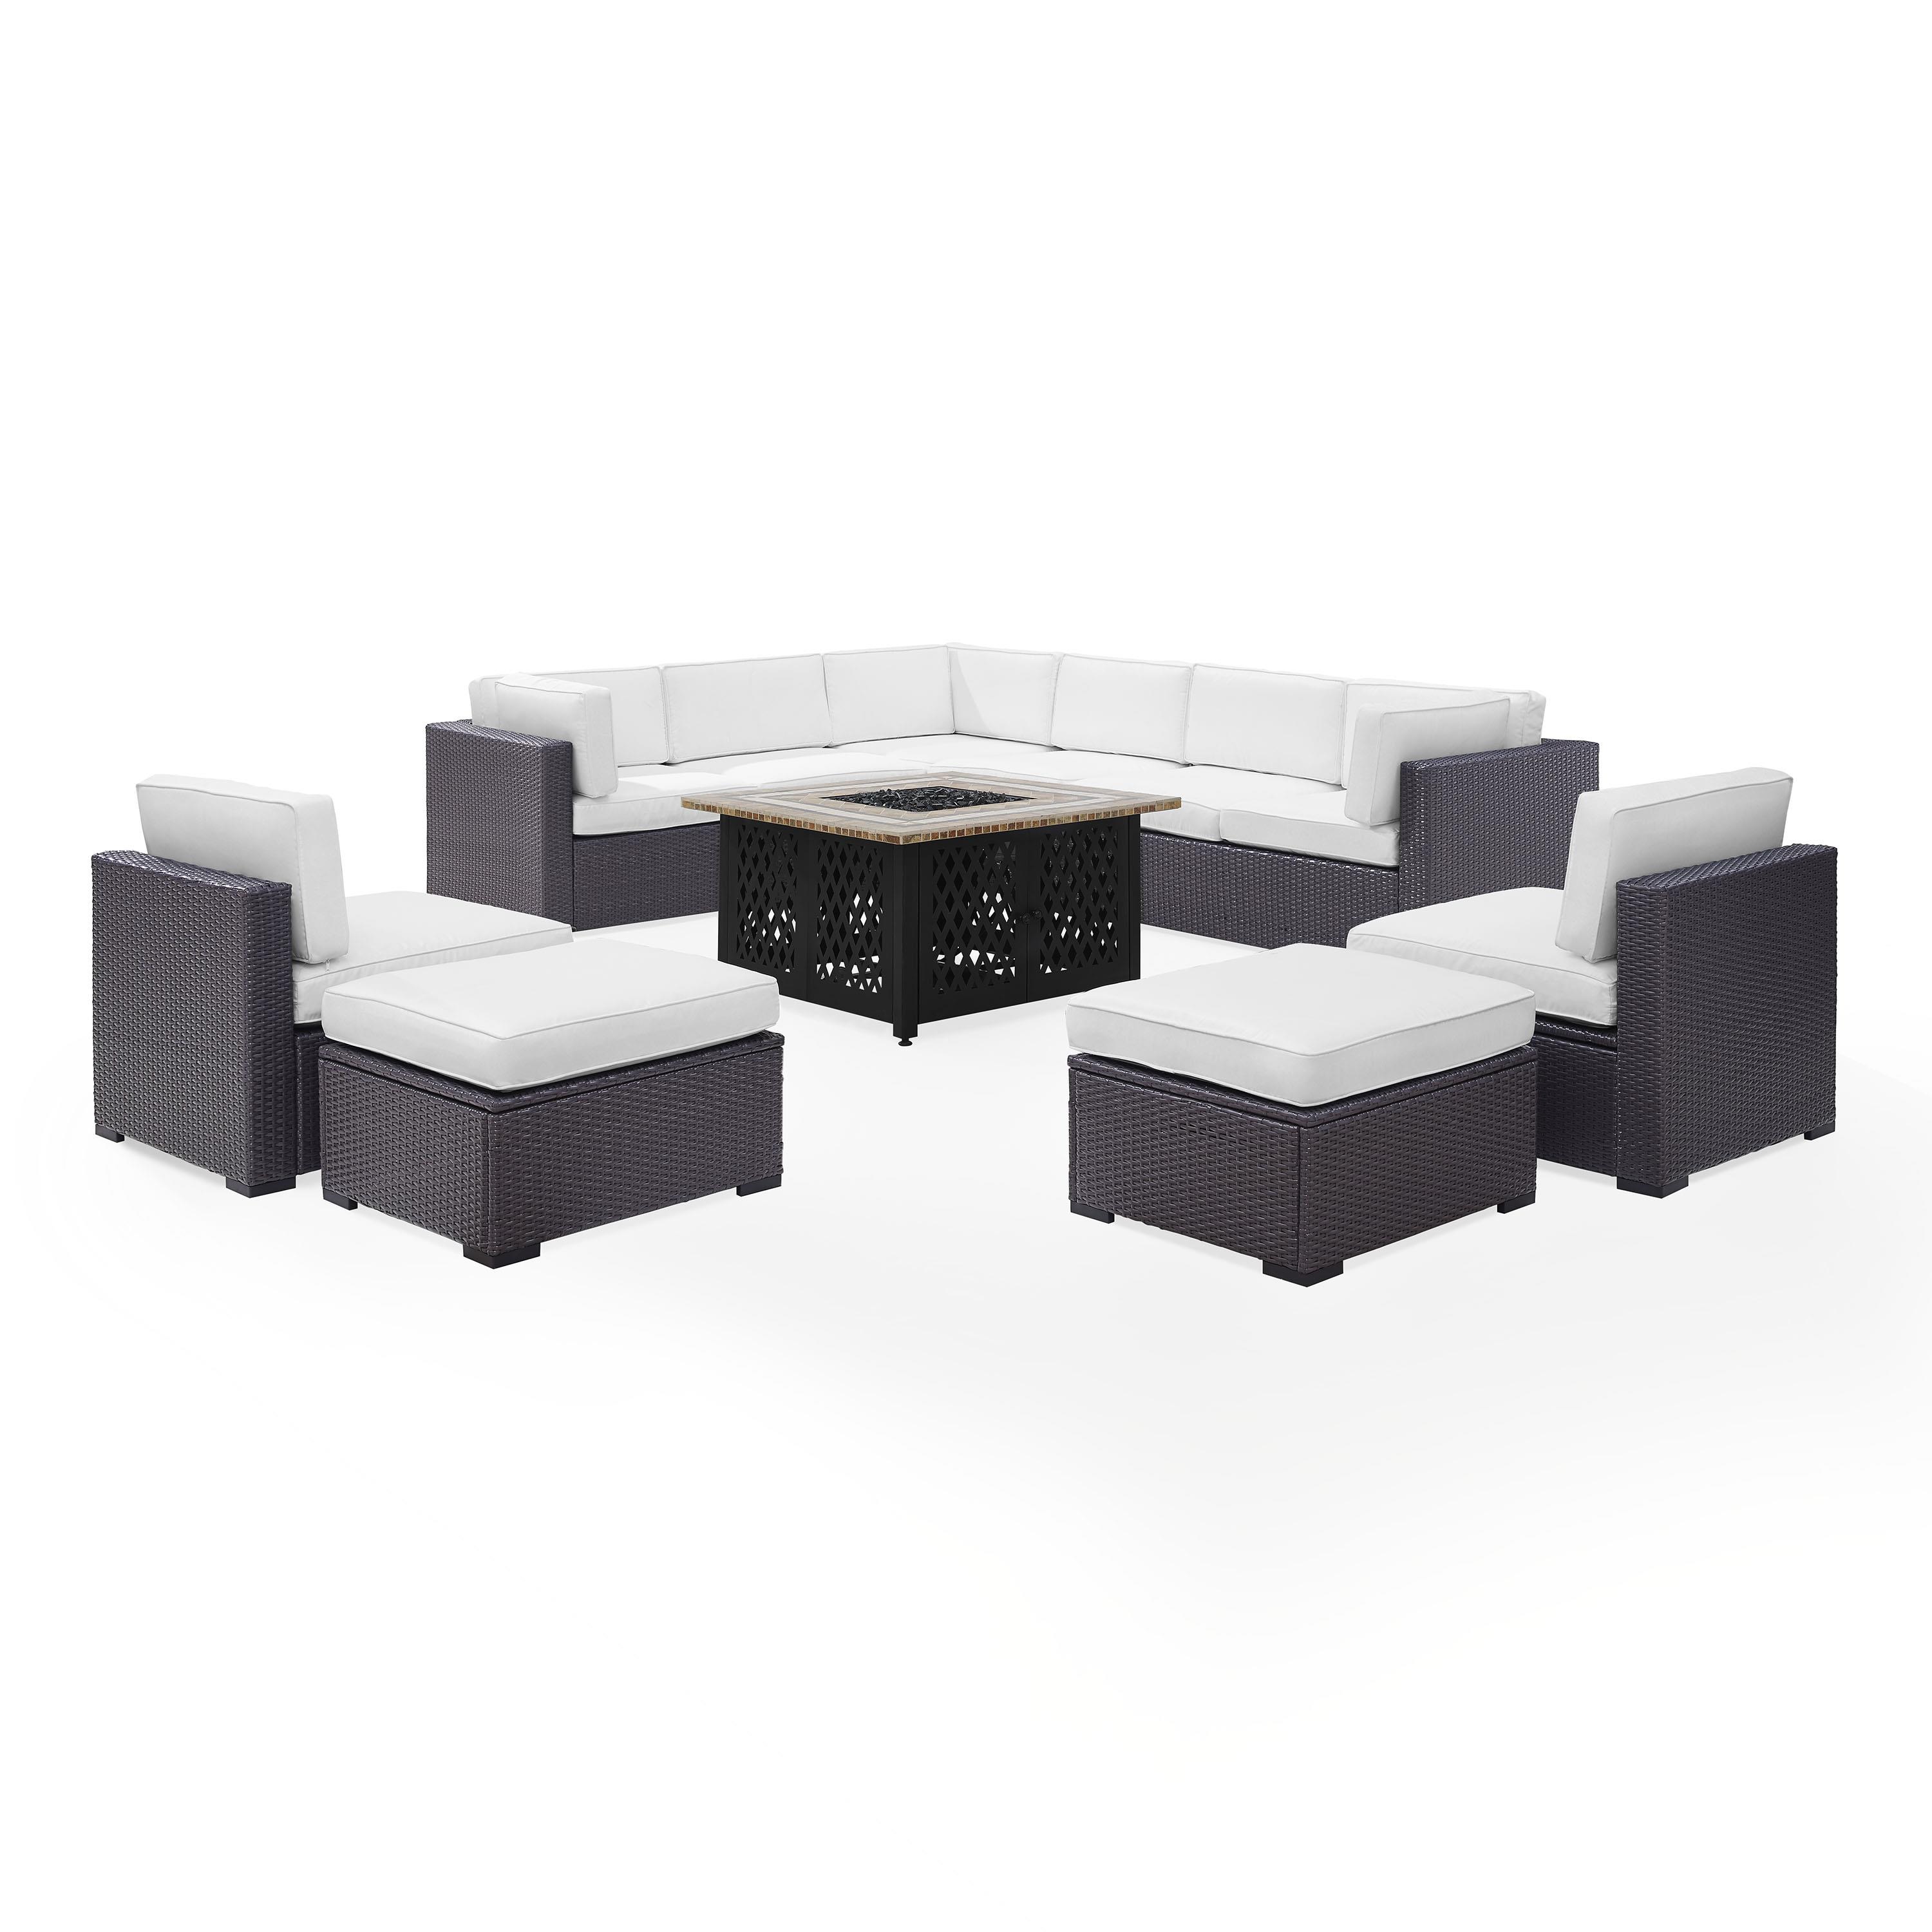 Crosley Furniture Biscayne 8 Piece Fabric Patio Fire Pit Sectional Set in White - image 4 of 4